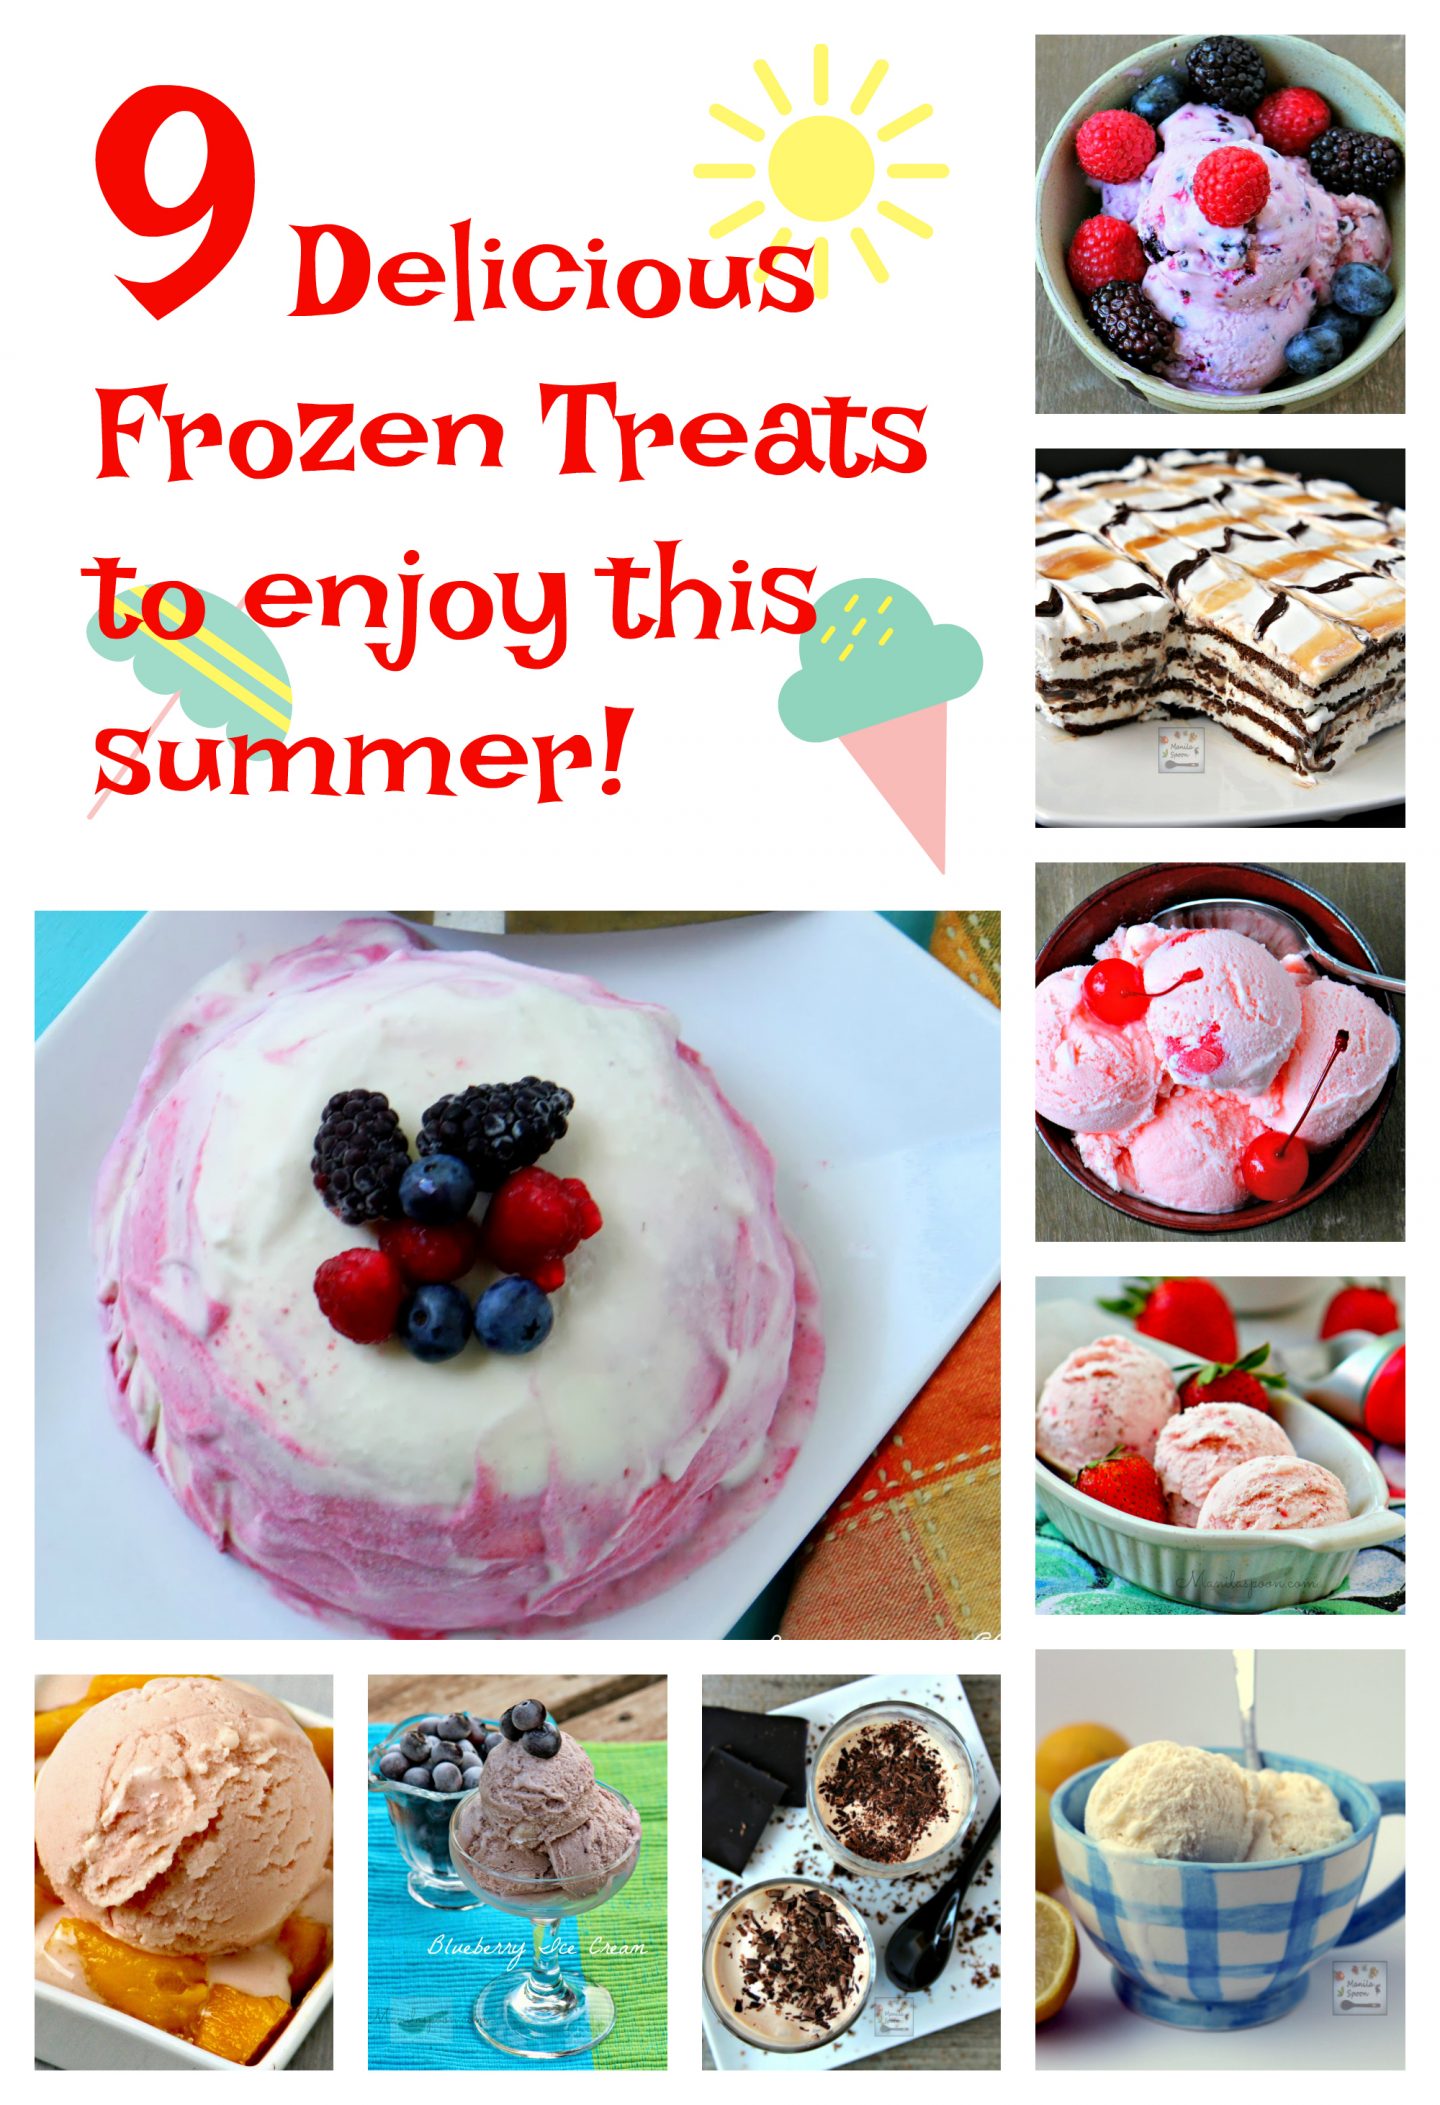 Having a scorching summer? No worries, we've got you covered! Cool down with these 9 delicious and easy to make frozen treats!